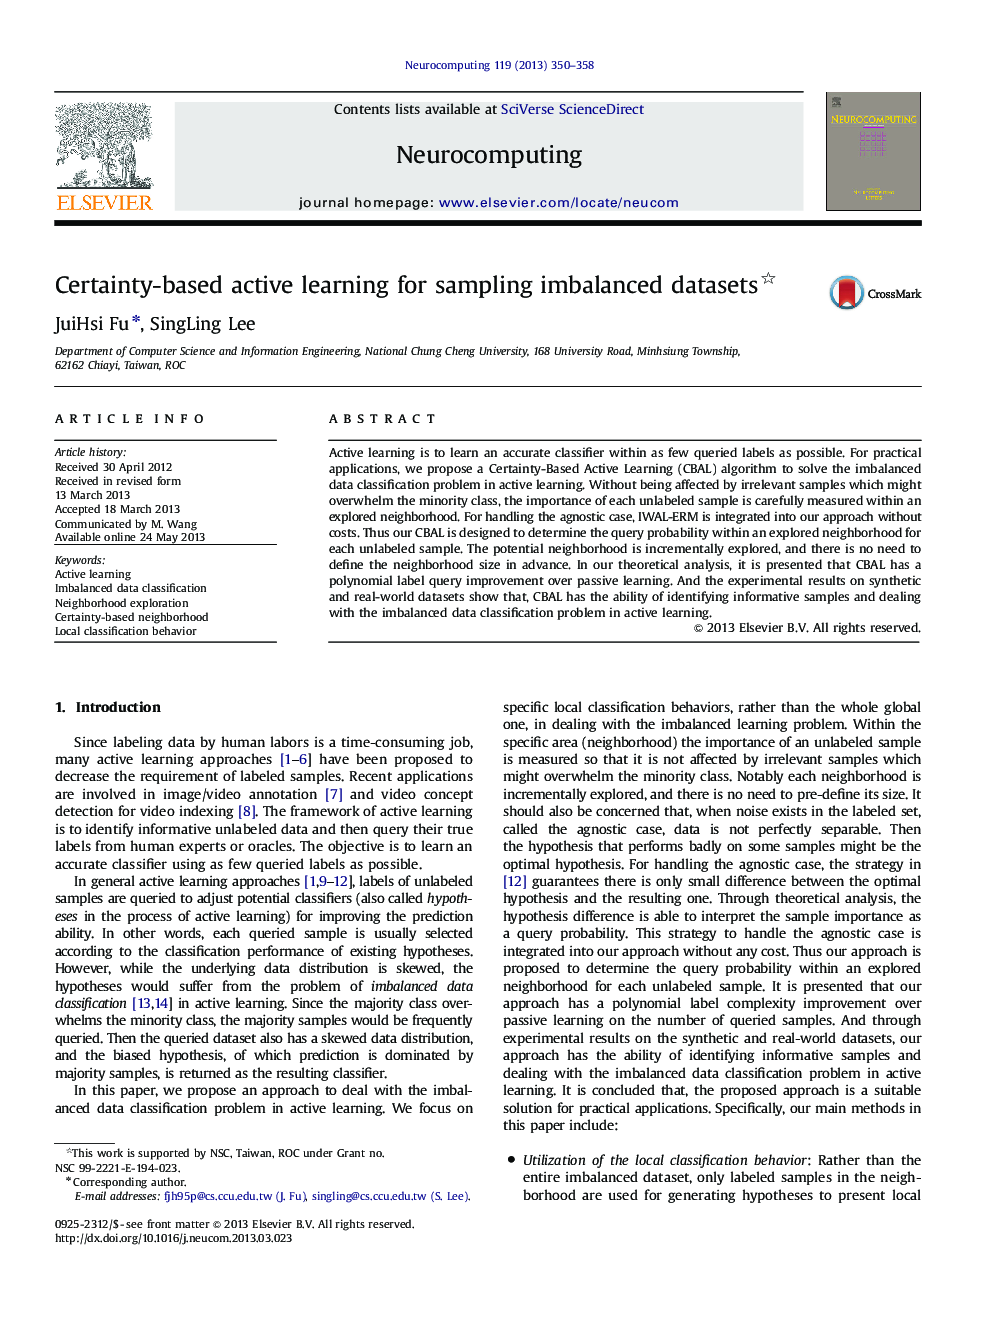 Certainty-based active learning for sampling imbalanced datasets 